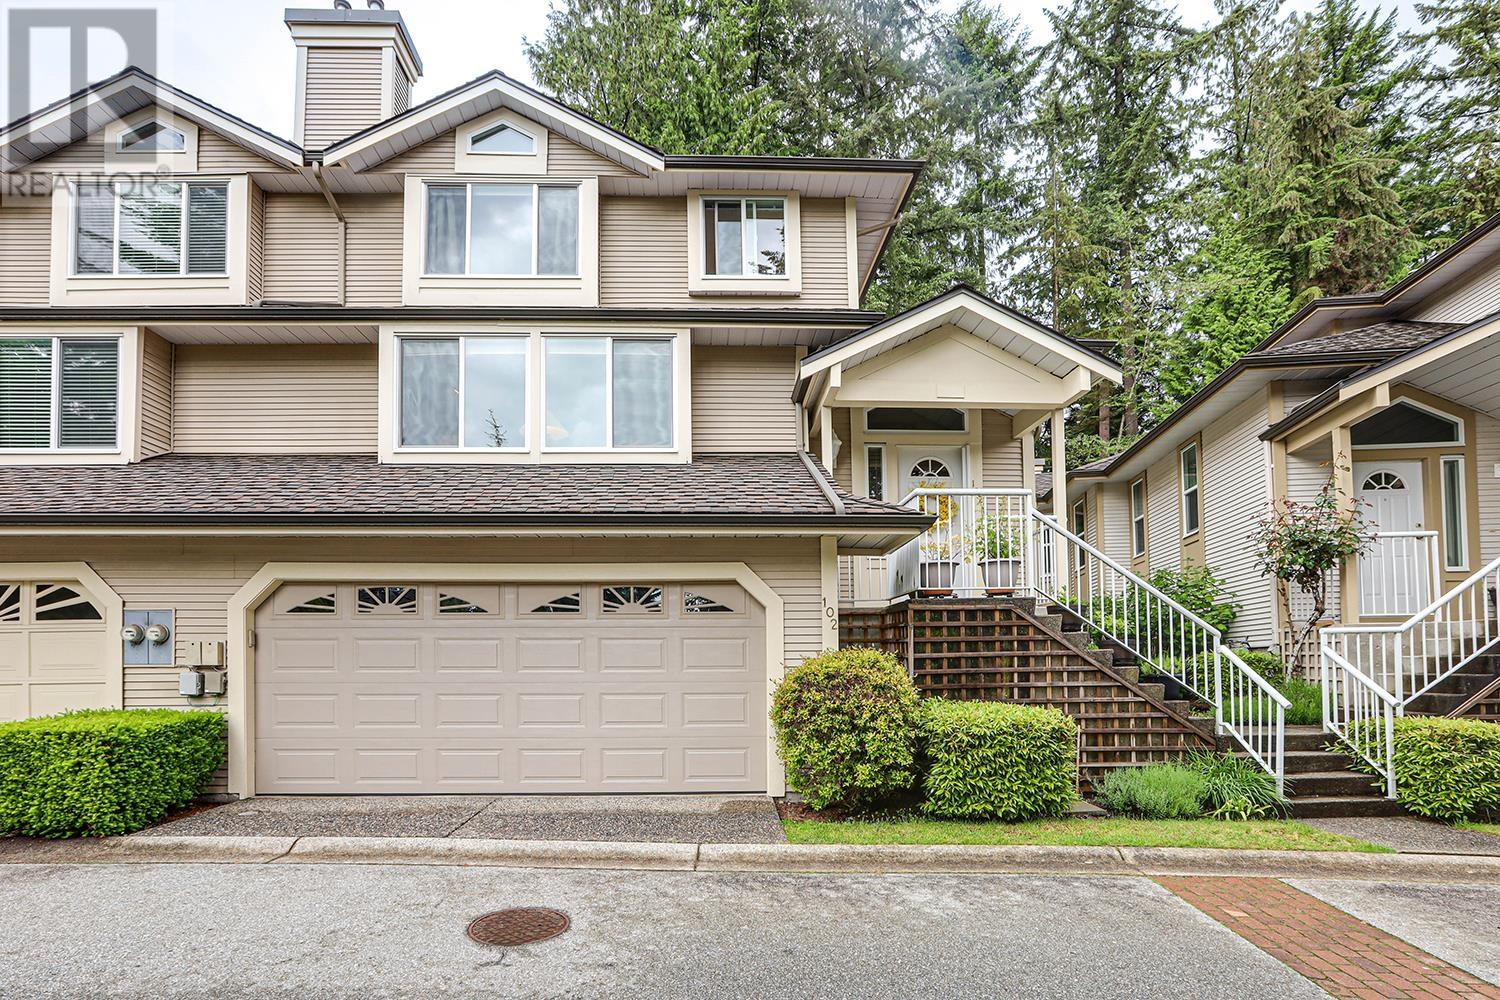 102 101 PARKSIDE DRIVE, port moody, British Columbia